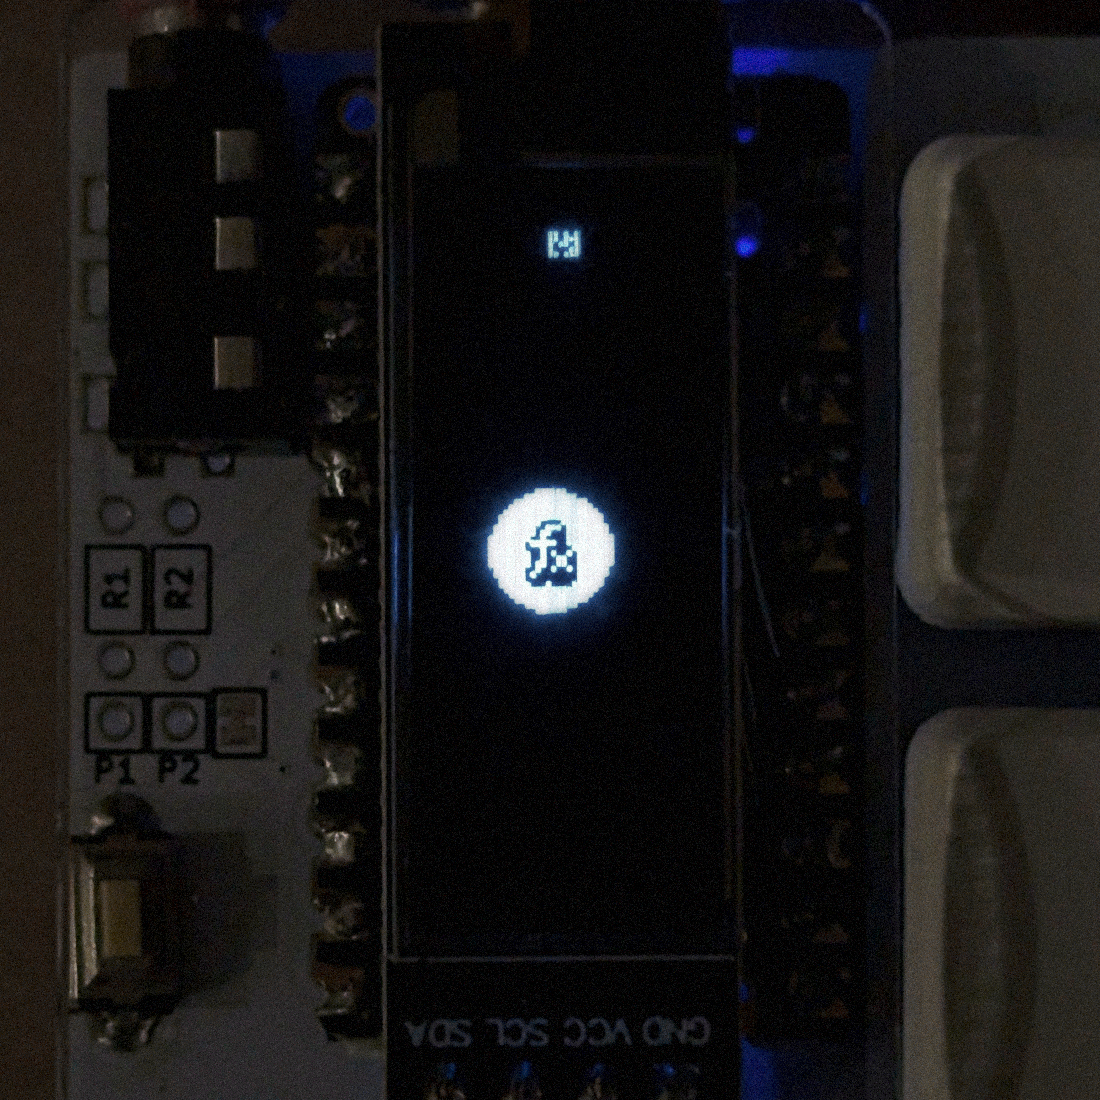 close-up photo of the OLED screen